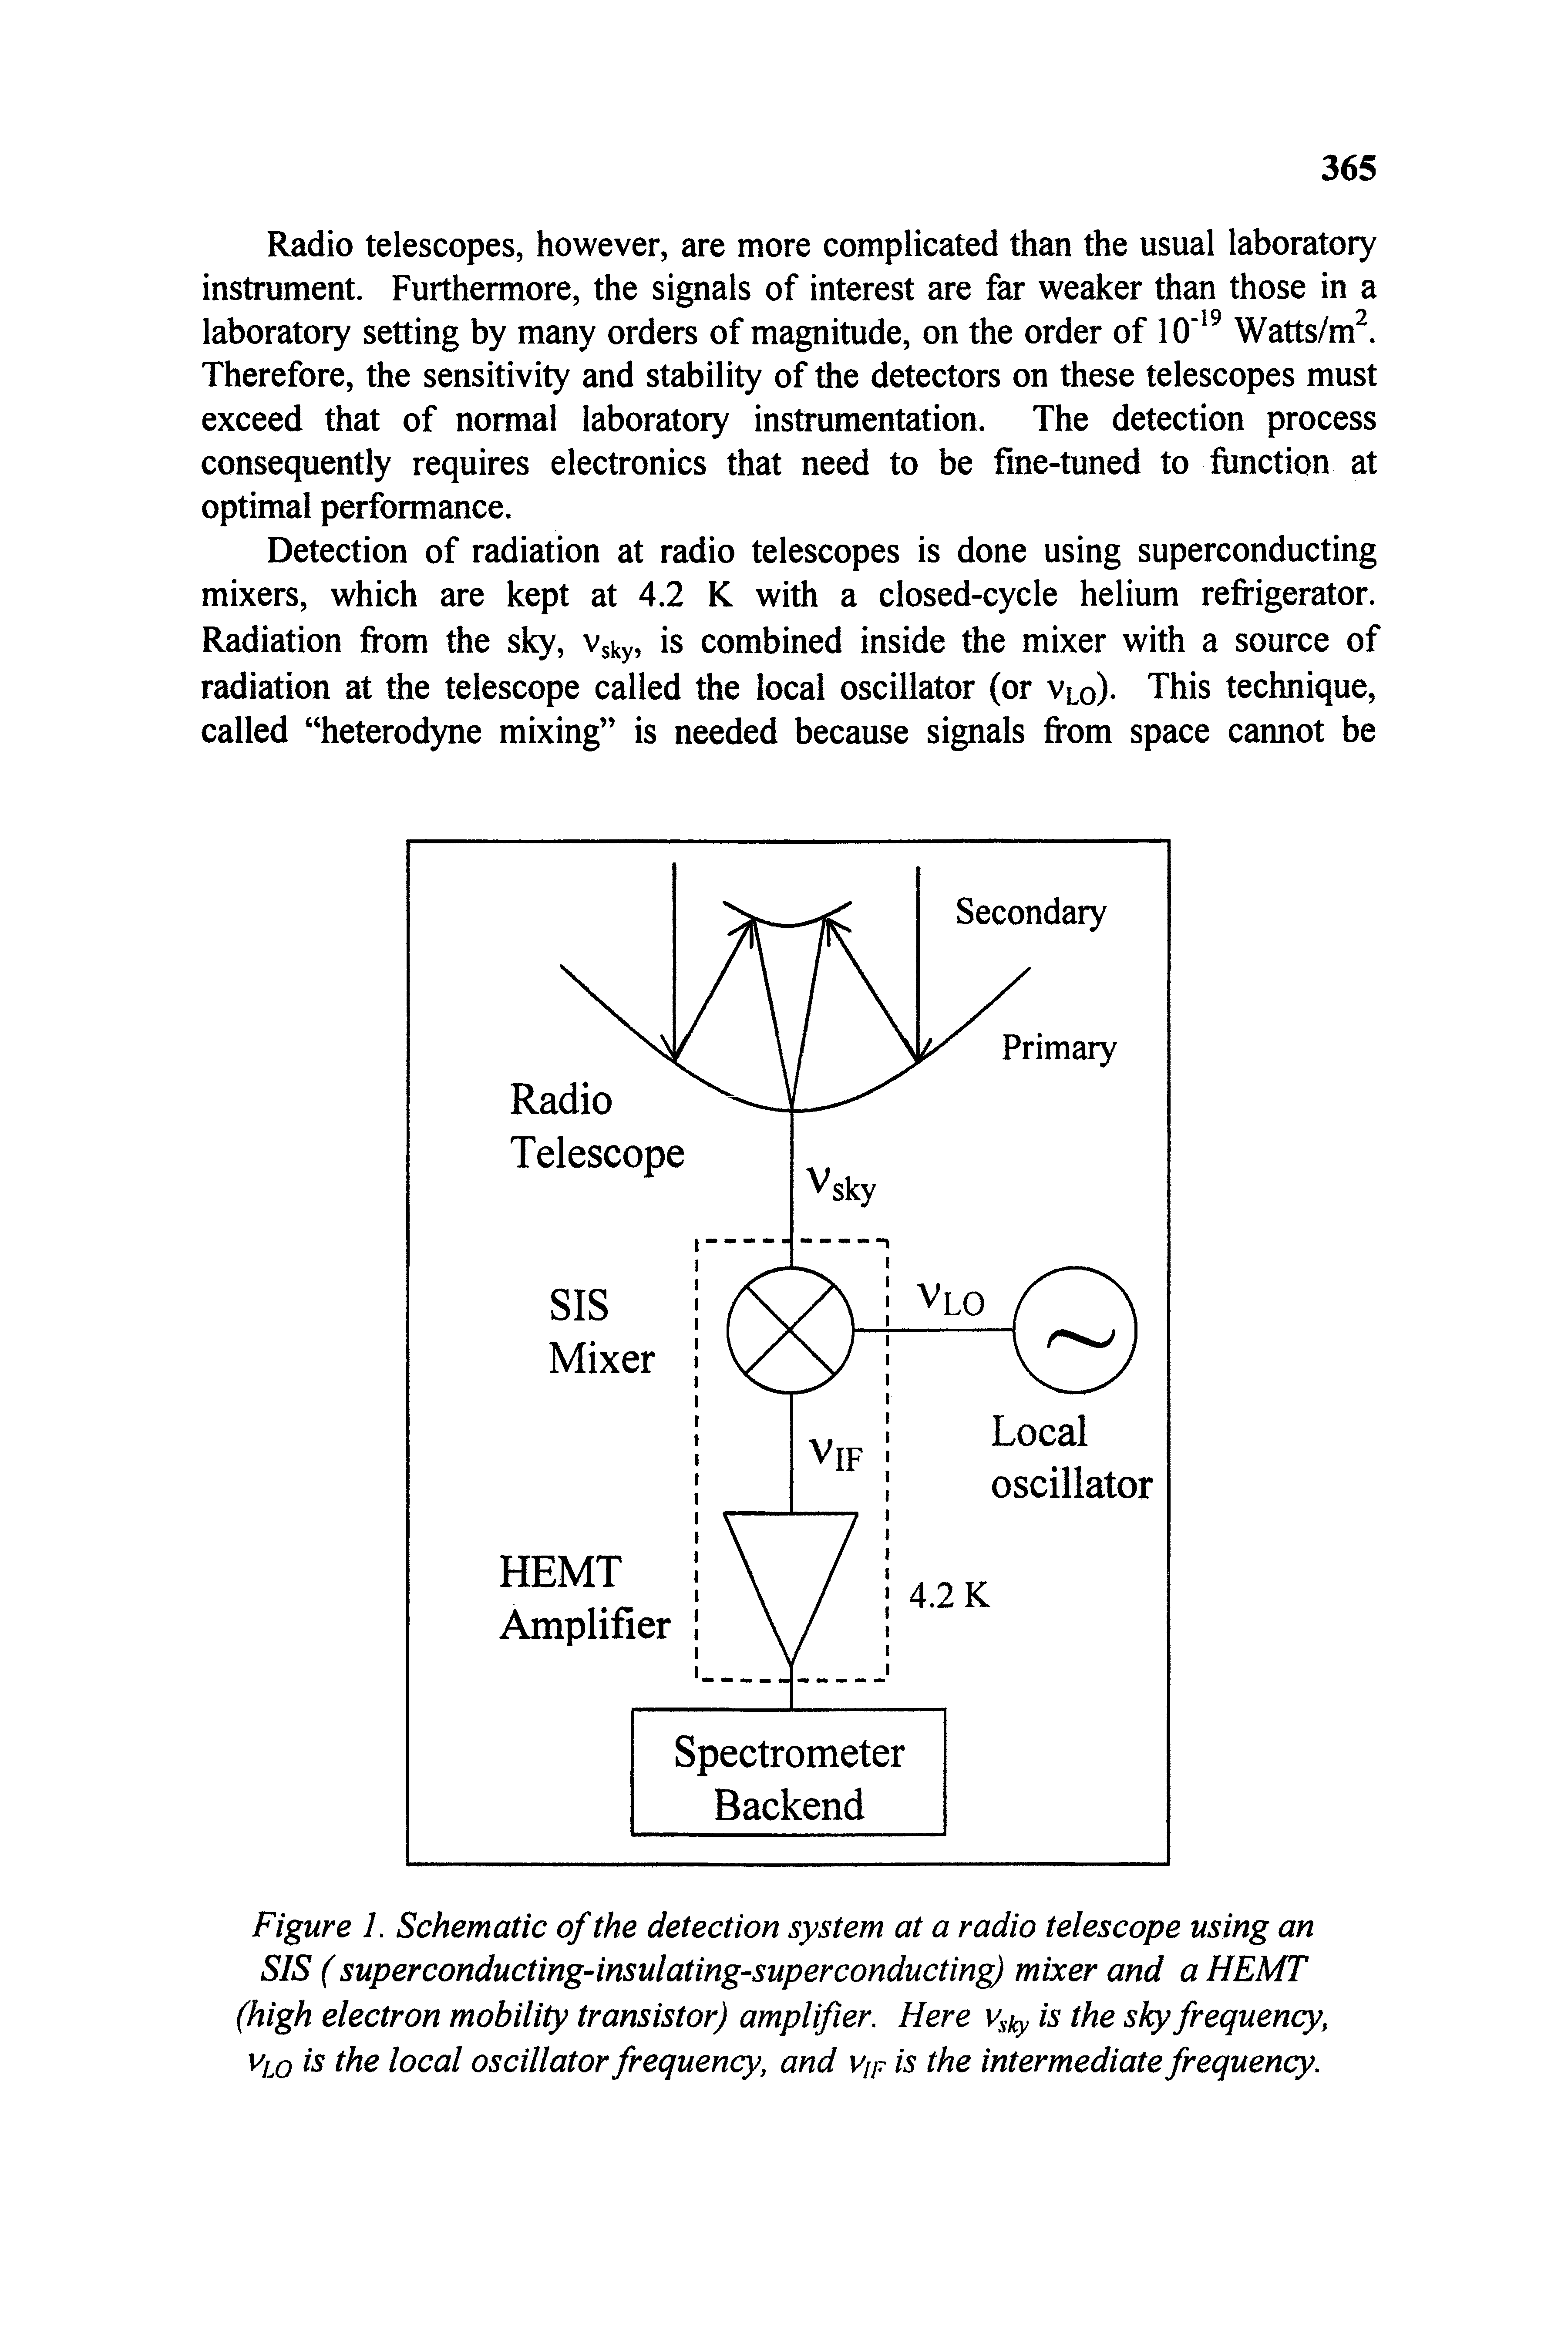 Figure 1. Schematic of the detection system at a radio telescope using an SIS (superconducting-insulating-superconducting) mixer and a HEMT (high electron mobility transistor) amplifier. Here v ky is the sky frequency, Vio ibe local oscillator frequency, and Vif is the intermediate frequency.